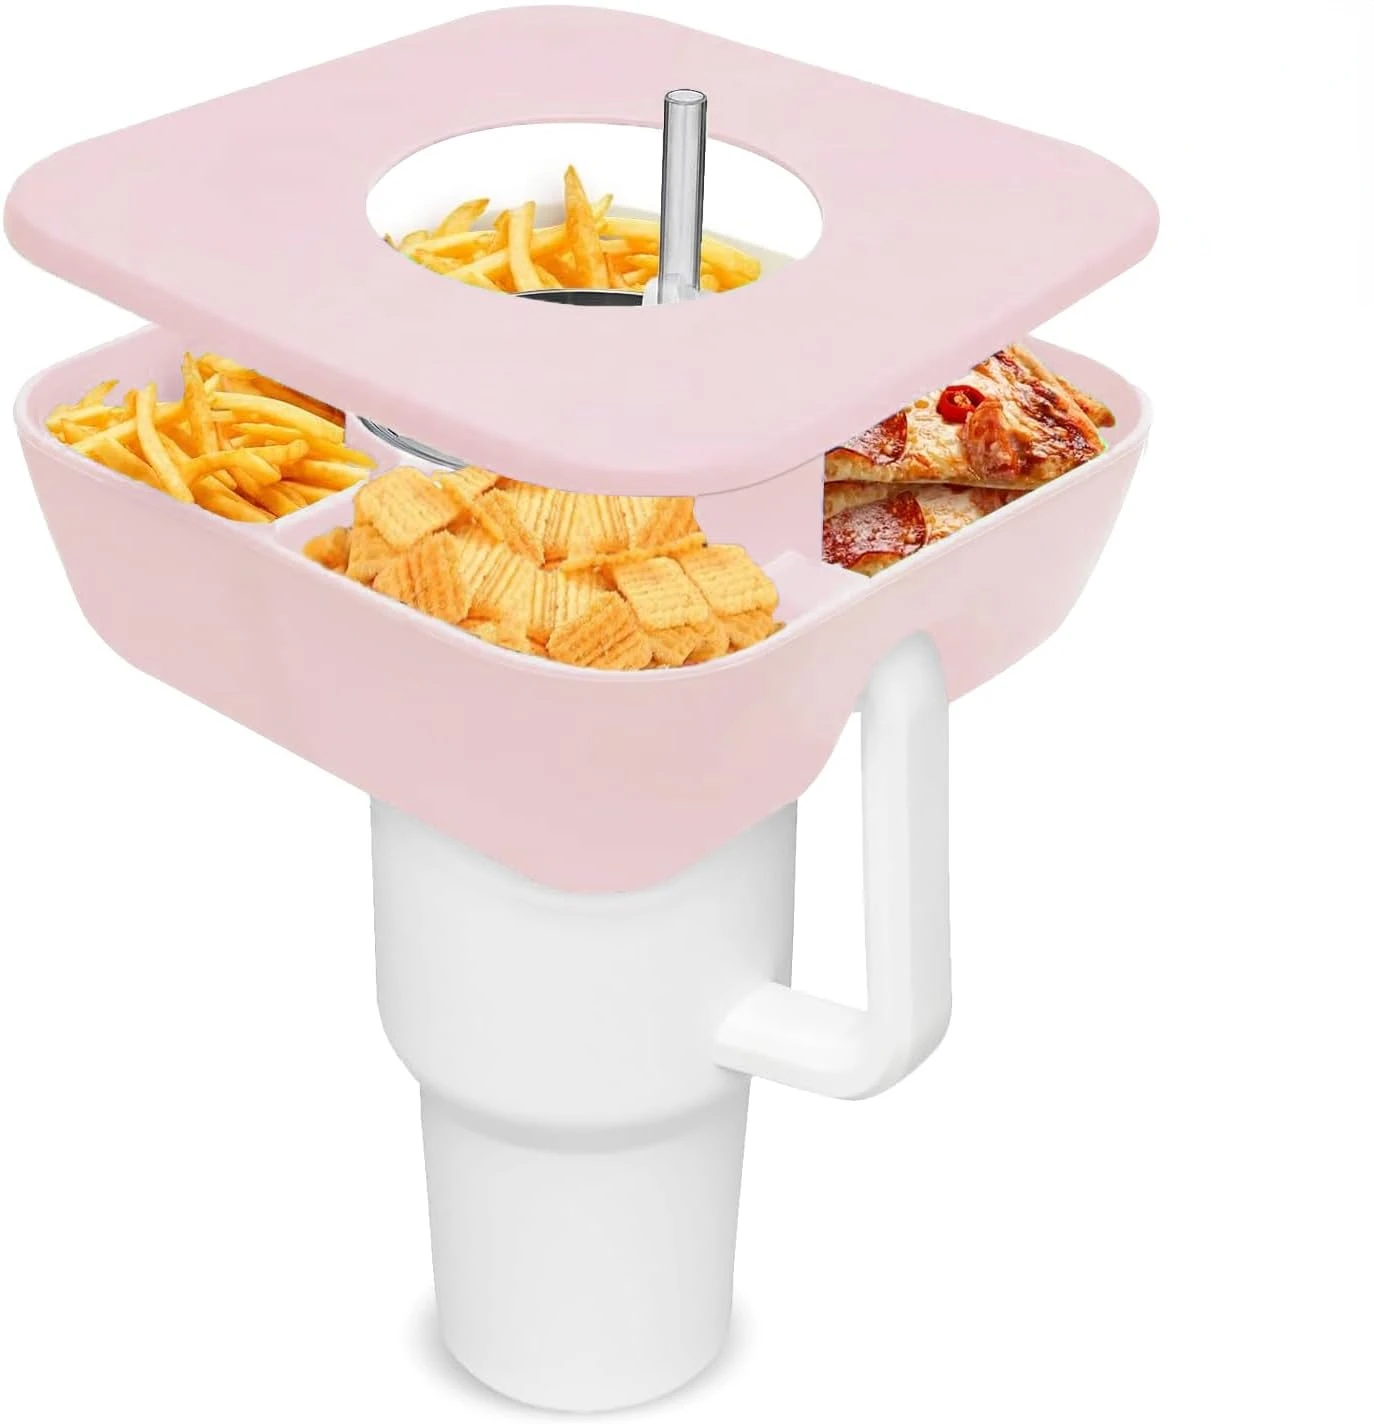 Snack Bowl for Stanley Cup,Reusable Tray for Tumbler Snack Snack Tray for Candy,Appetizer,Nuts,Popcorn,Cup Holder for Outdoor